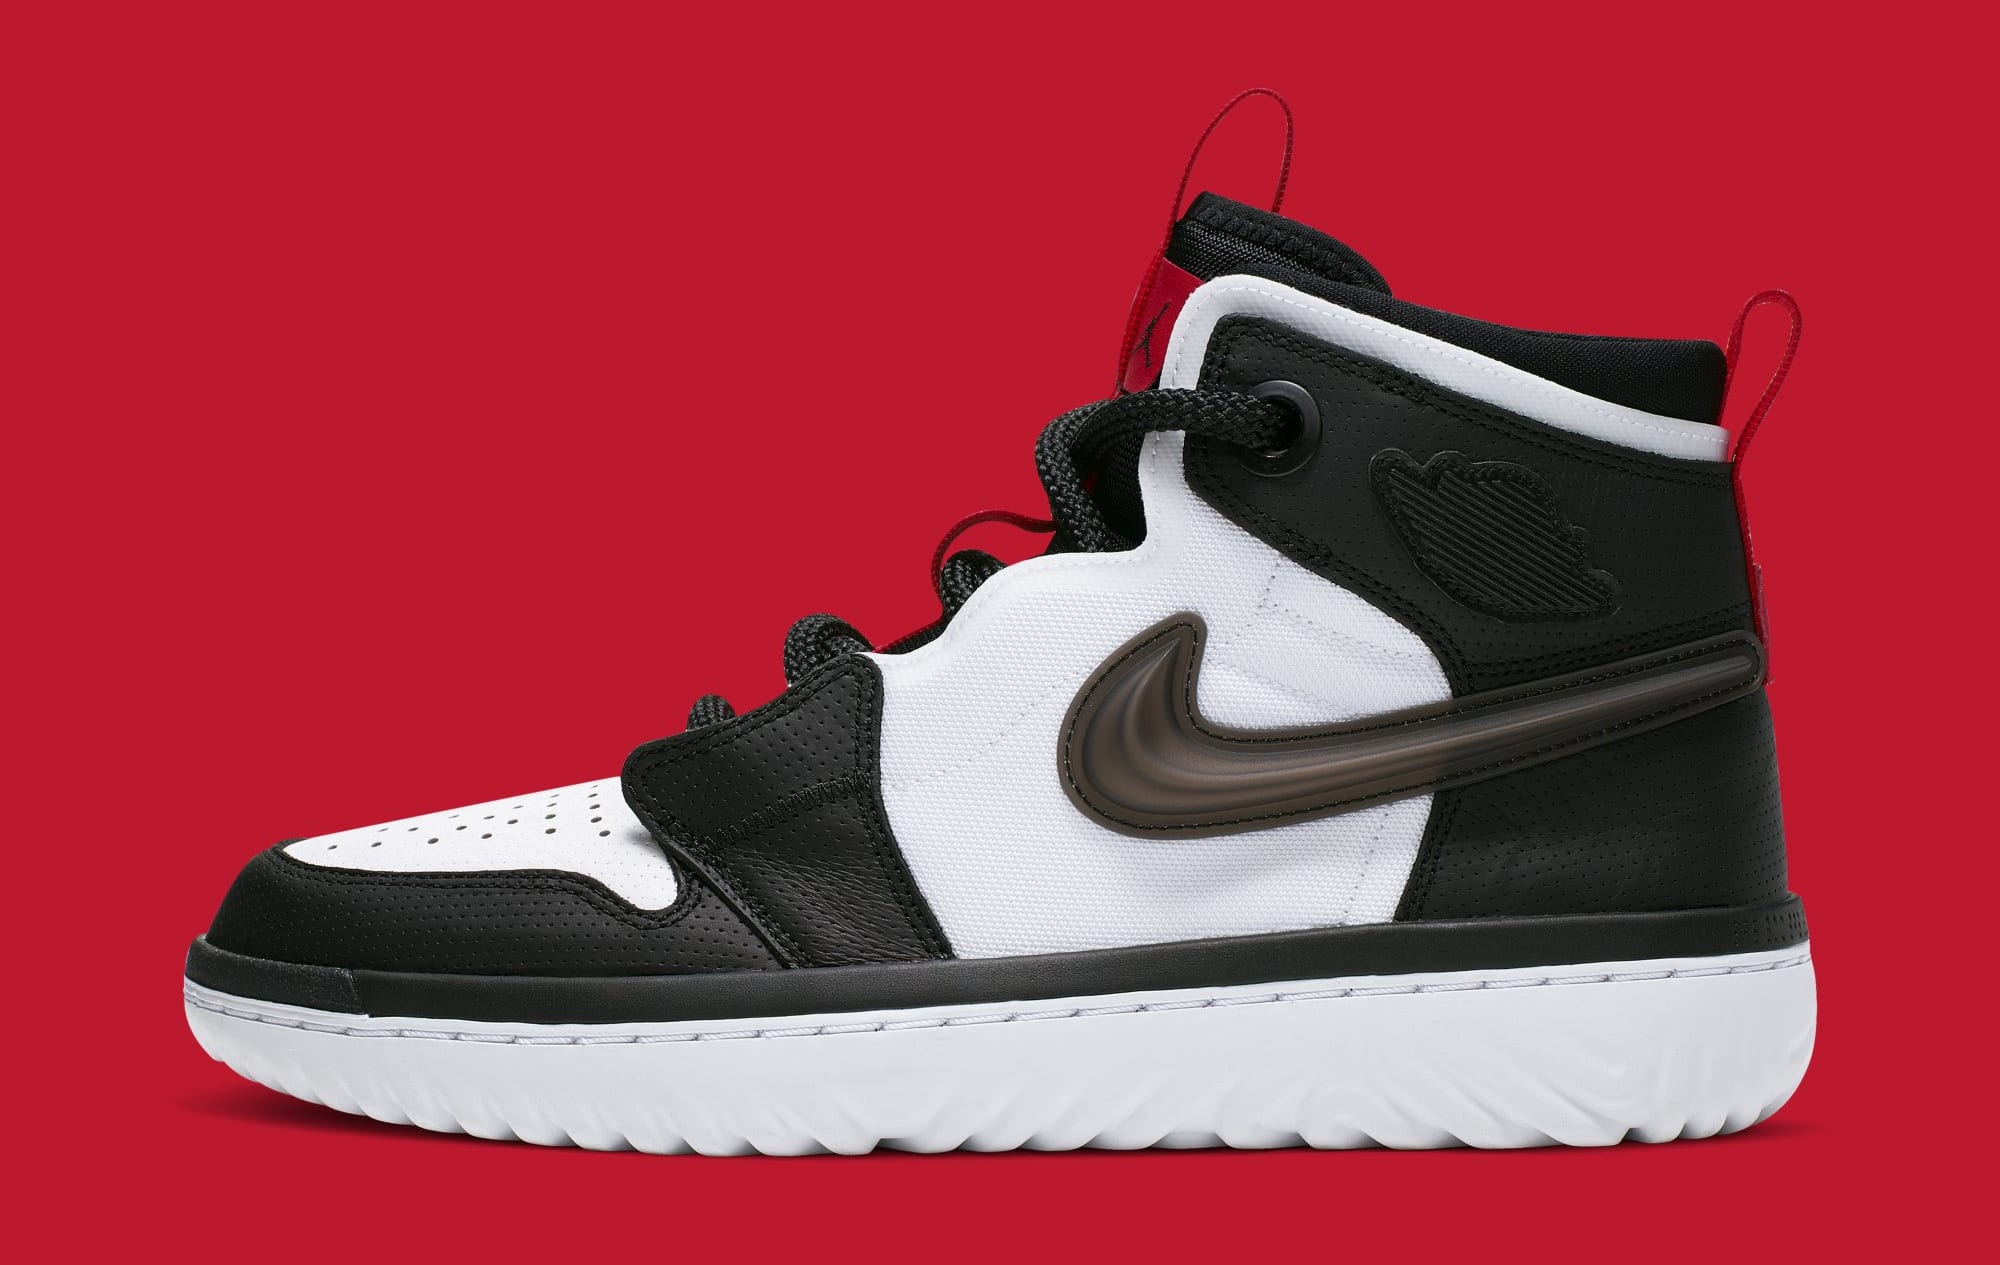 Air Jordan 1 Mysteriously Appears With Ankle Strap, Sneakerheads React